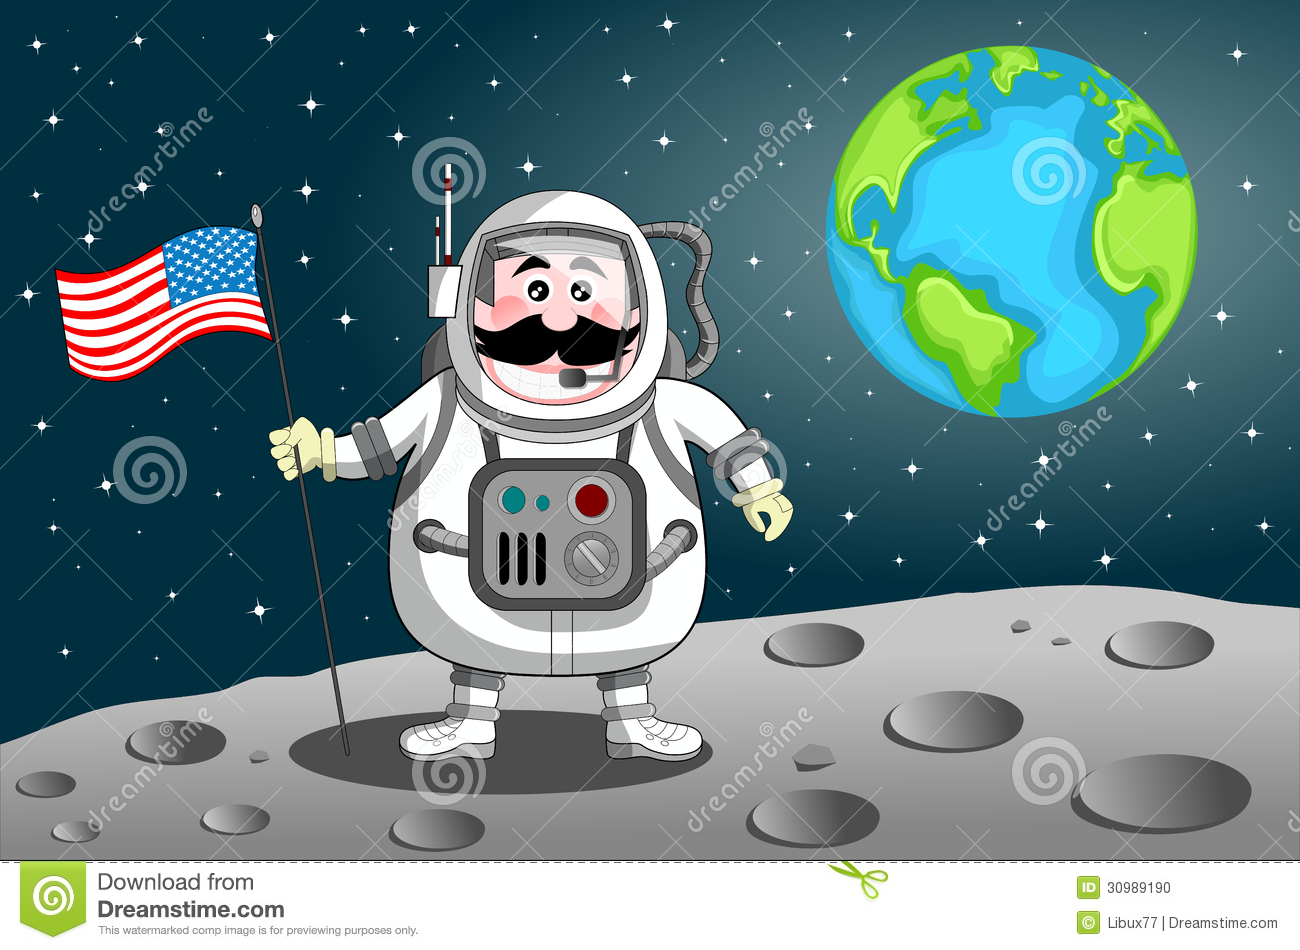 Cartoon Astronaut Planting United States Flag On The Moon  Eps File Is